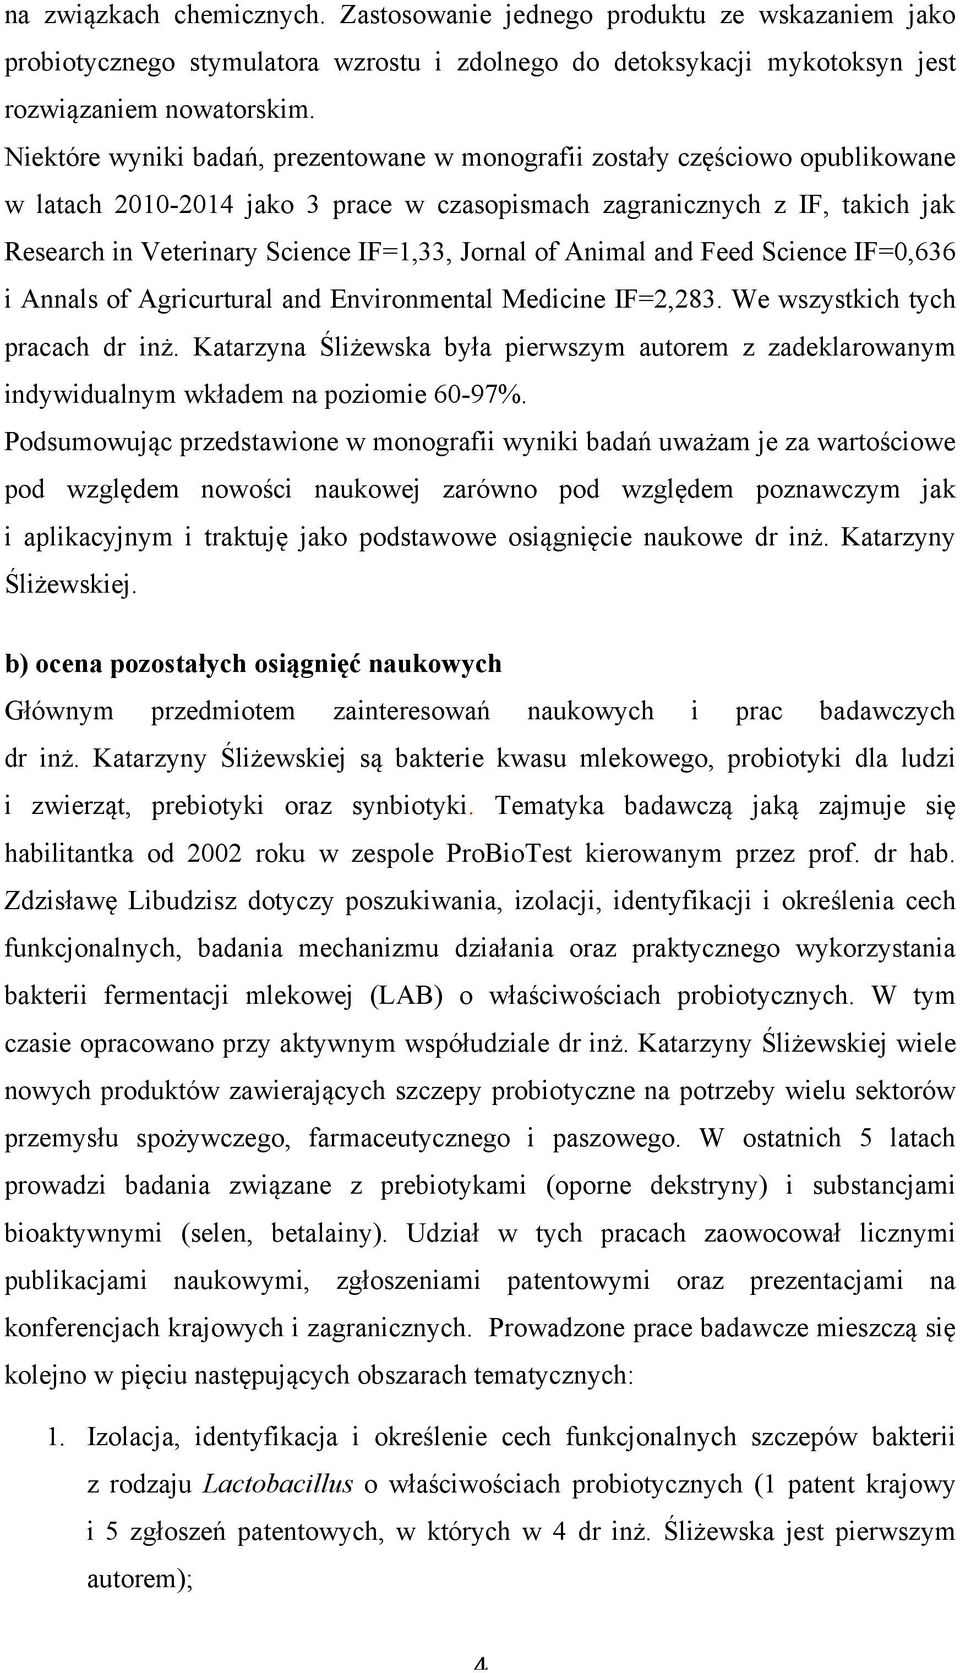 Jornal of Animal and Feed Science IF=0,636 i Annals of Agricurtural and Environmental Medicine IF=2,283. We wszystkich tych pracach dr inż.